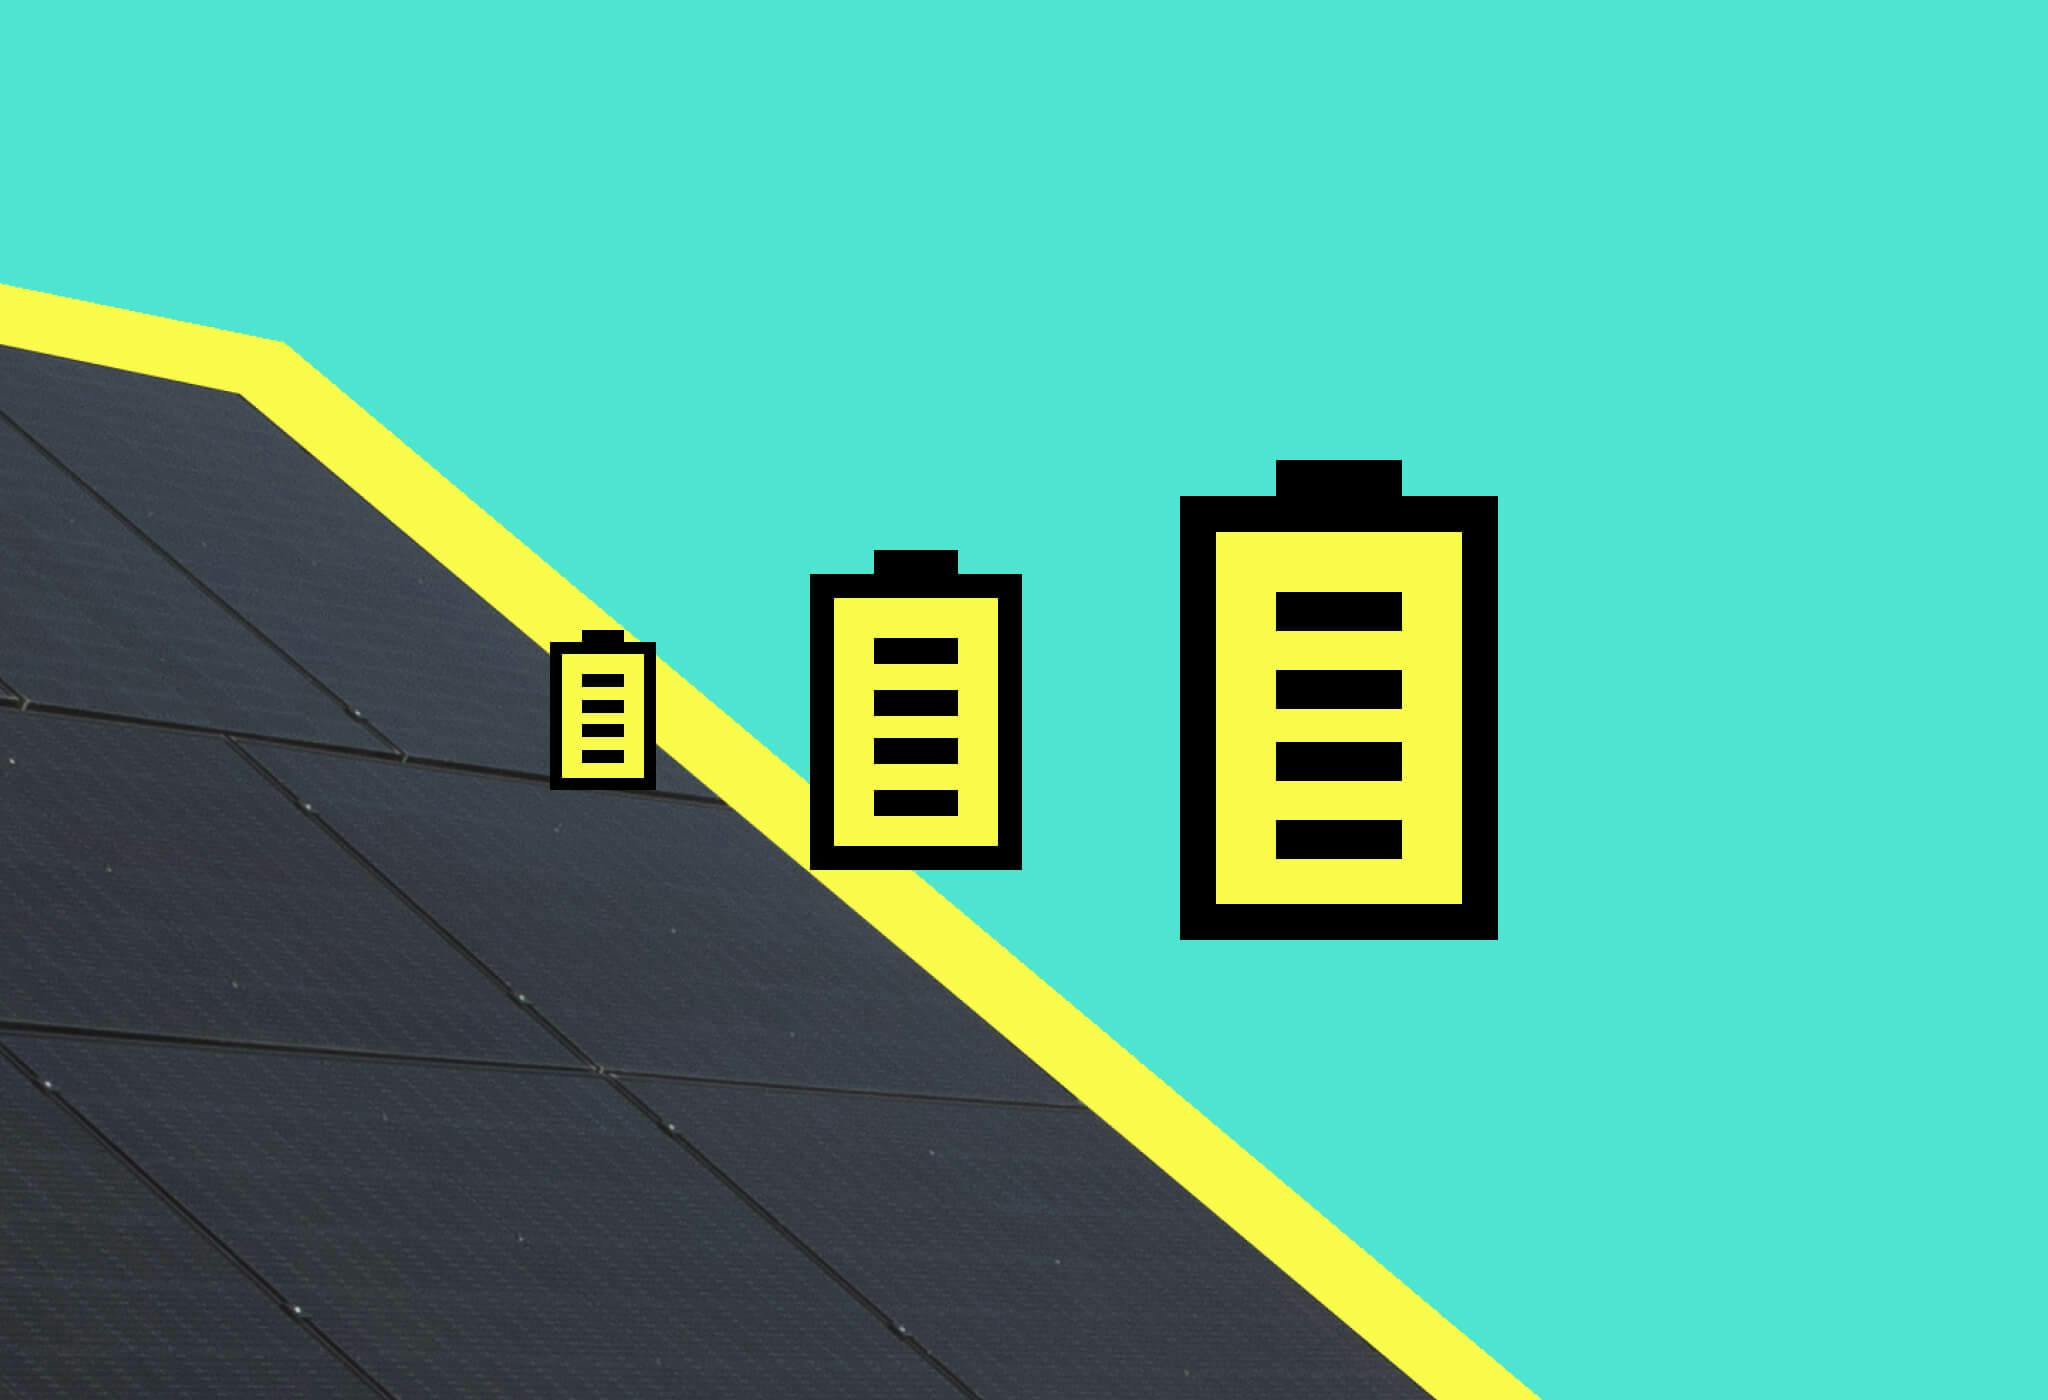 A black solar panel in the corner with a yellow outline, three cartoon solar batteries in the centre (of varying sizes)